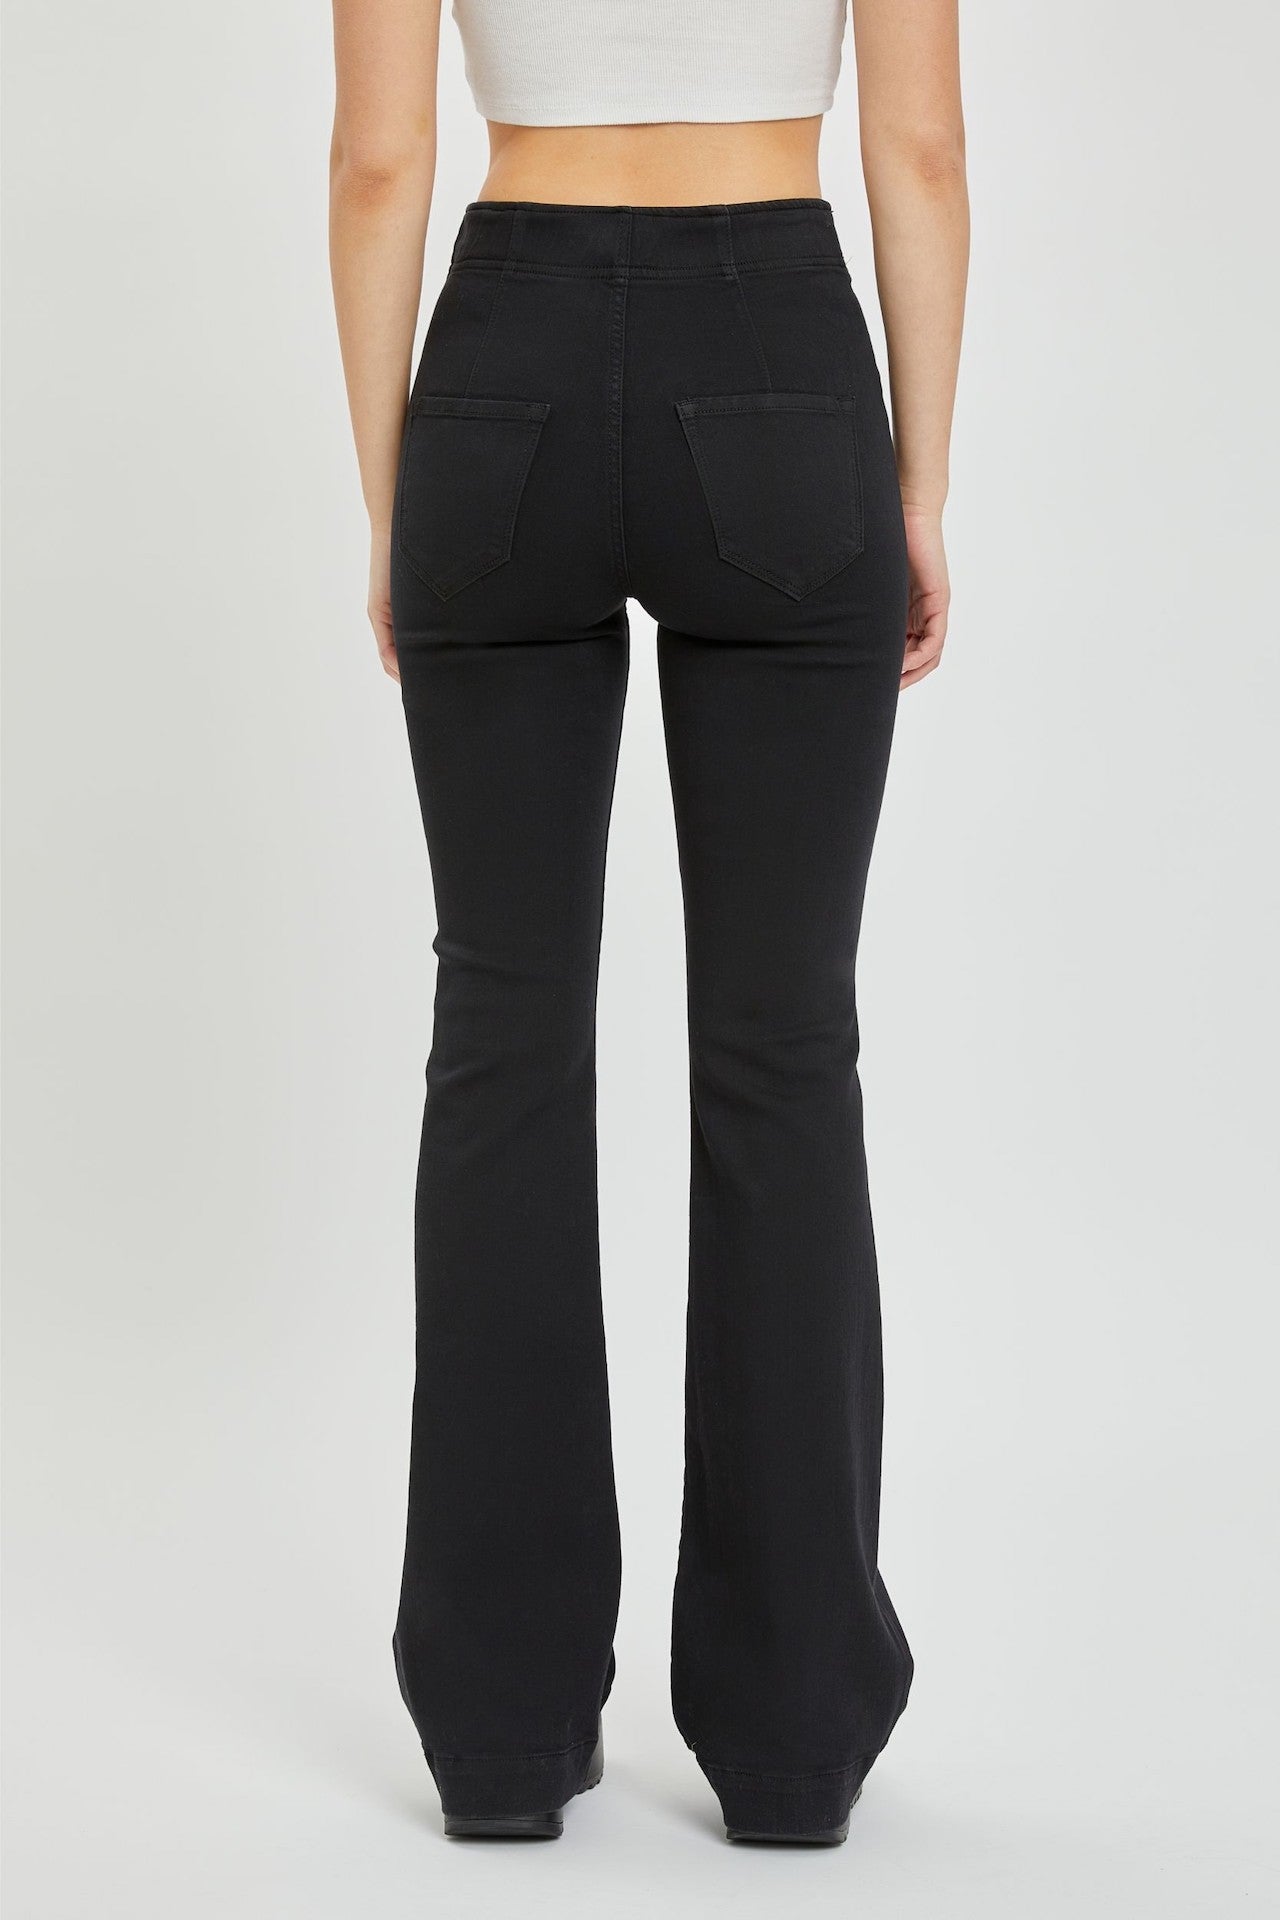 Buy Stylish Black Flared Jeggings Collection At Best Prices Online